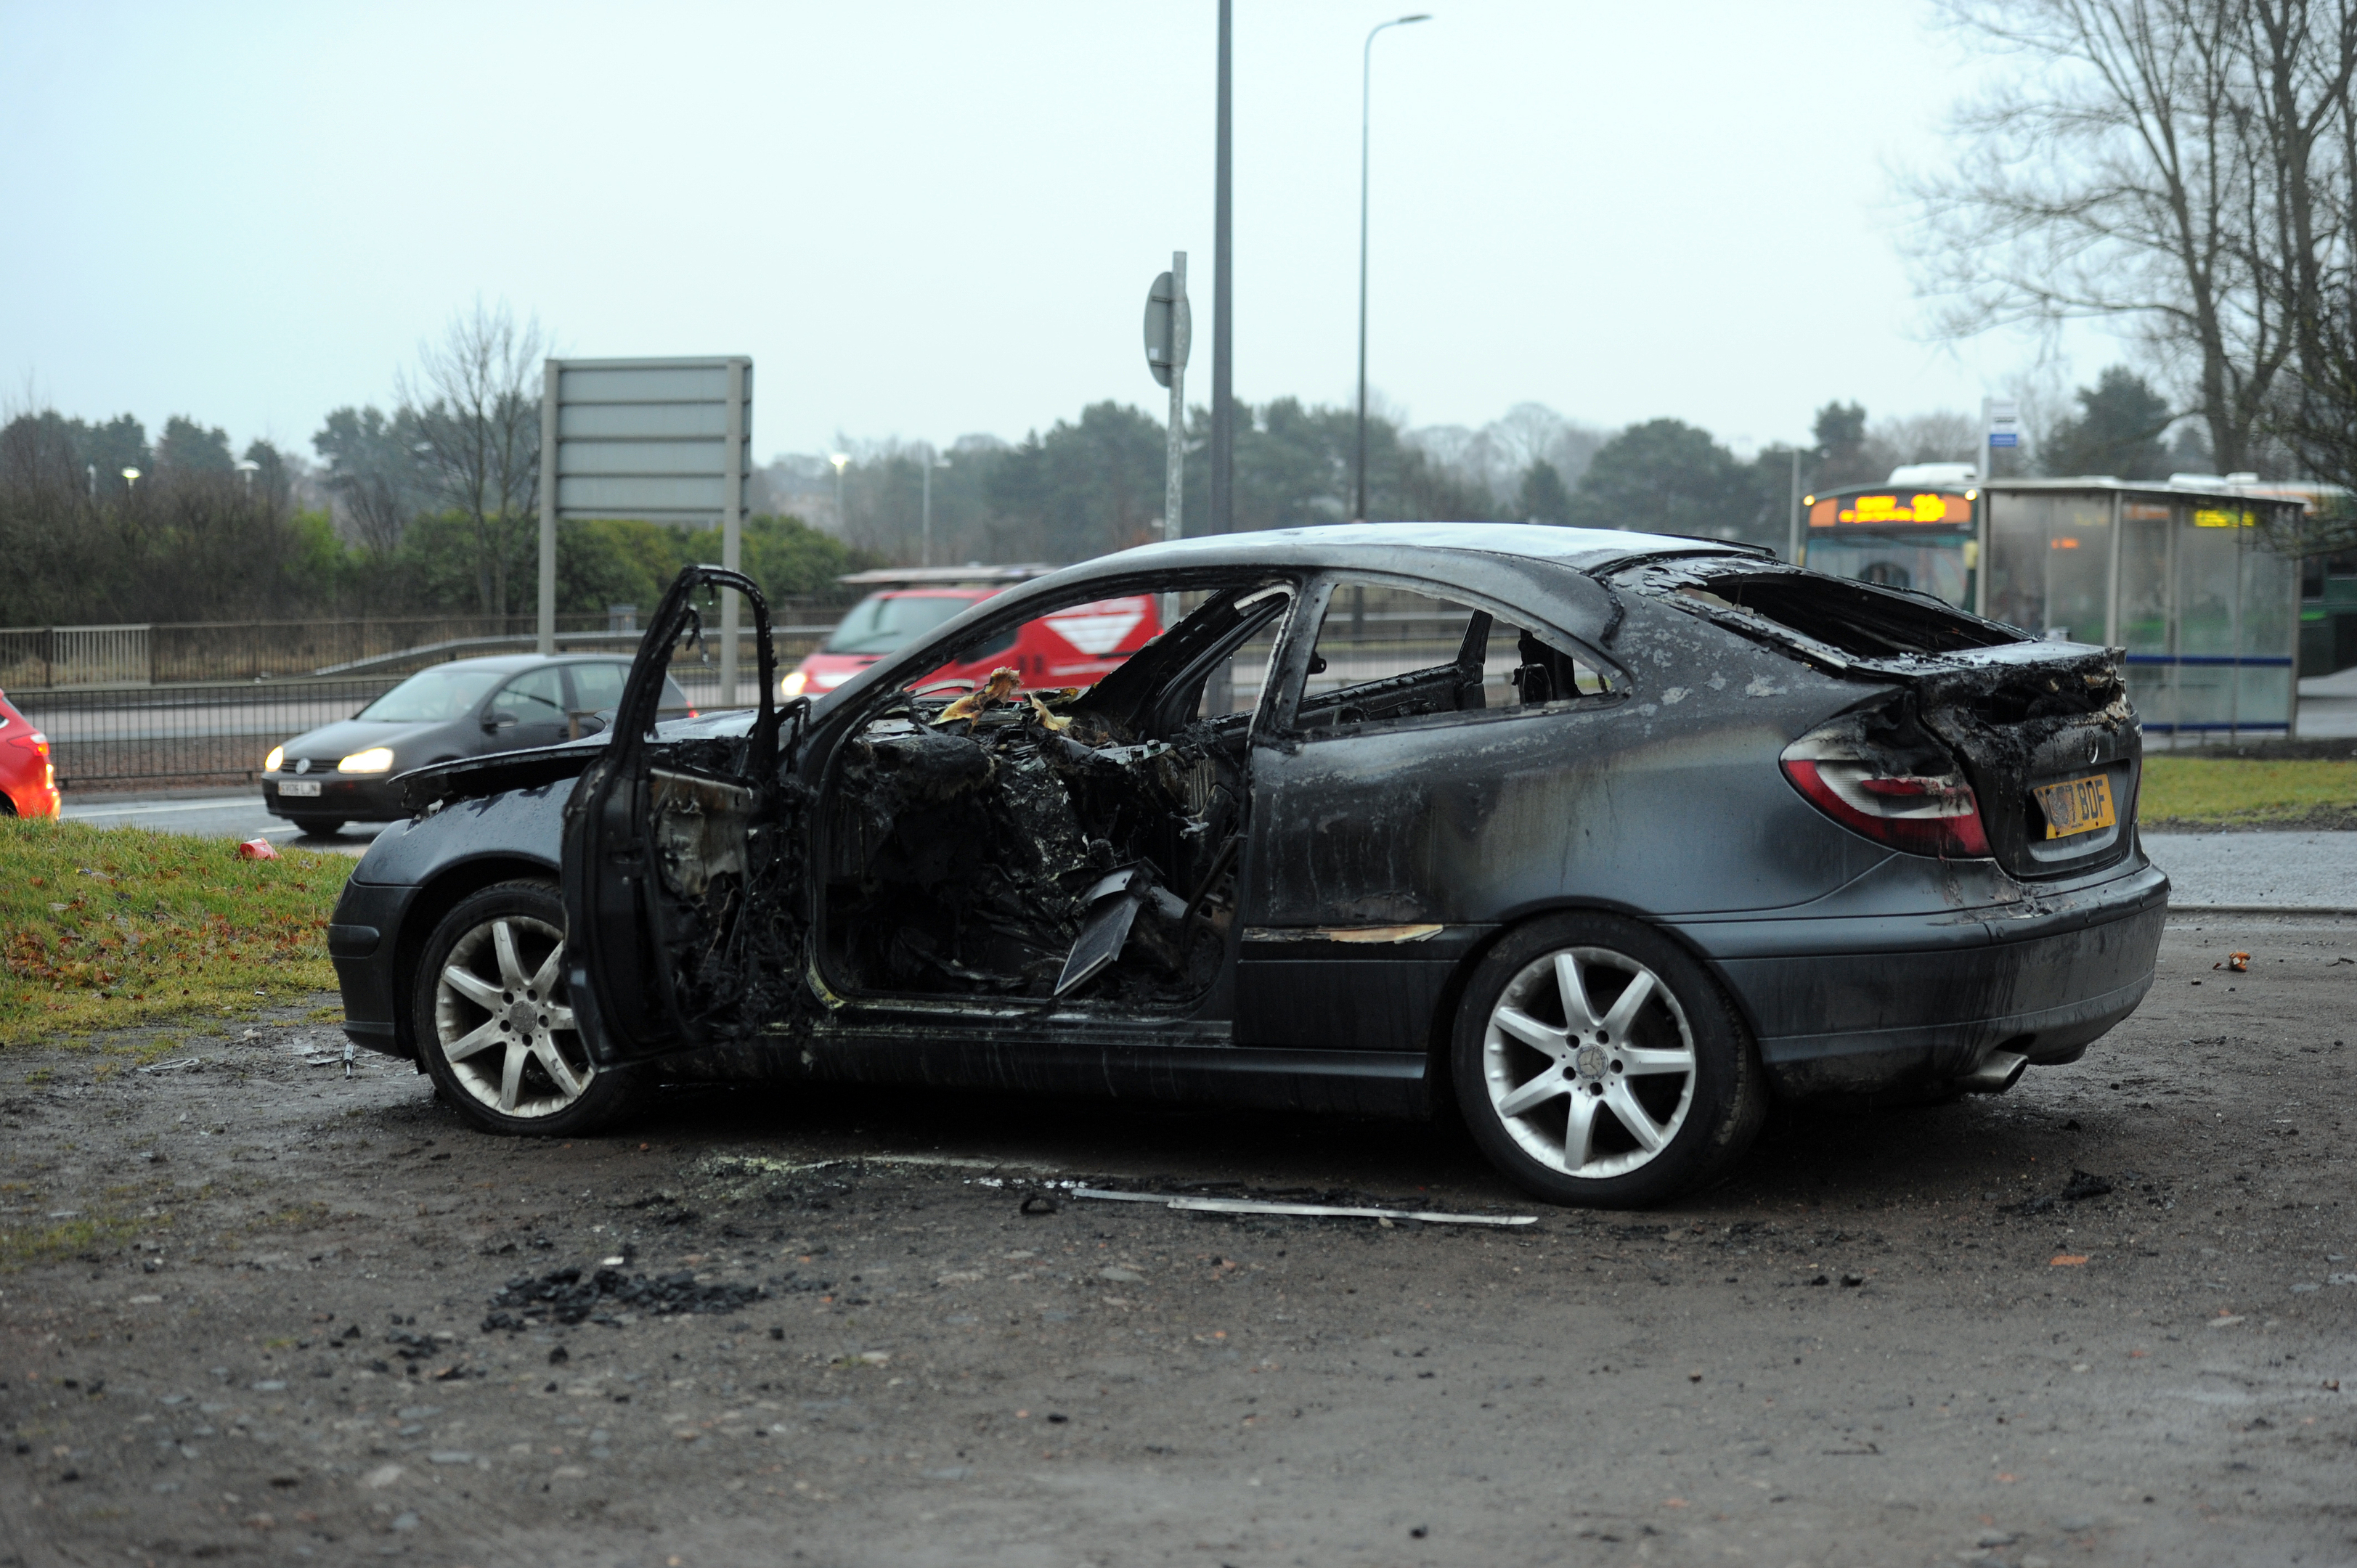 Over the weekend a car was burnt out in Caird Park next to Forfar Road.